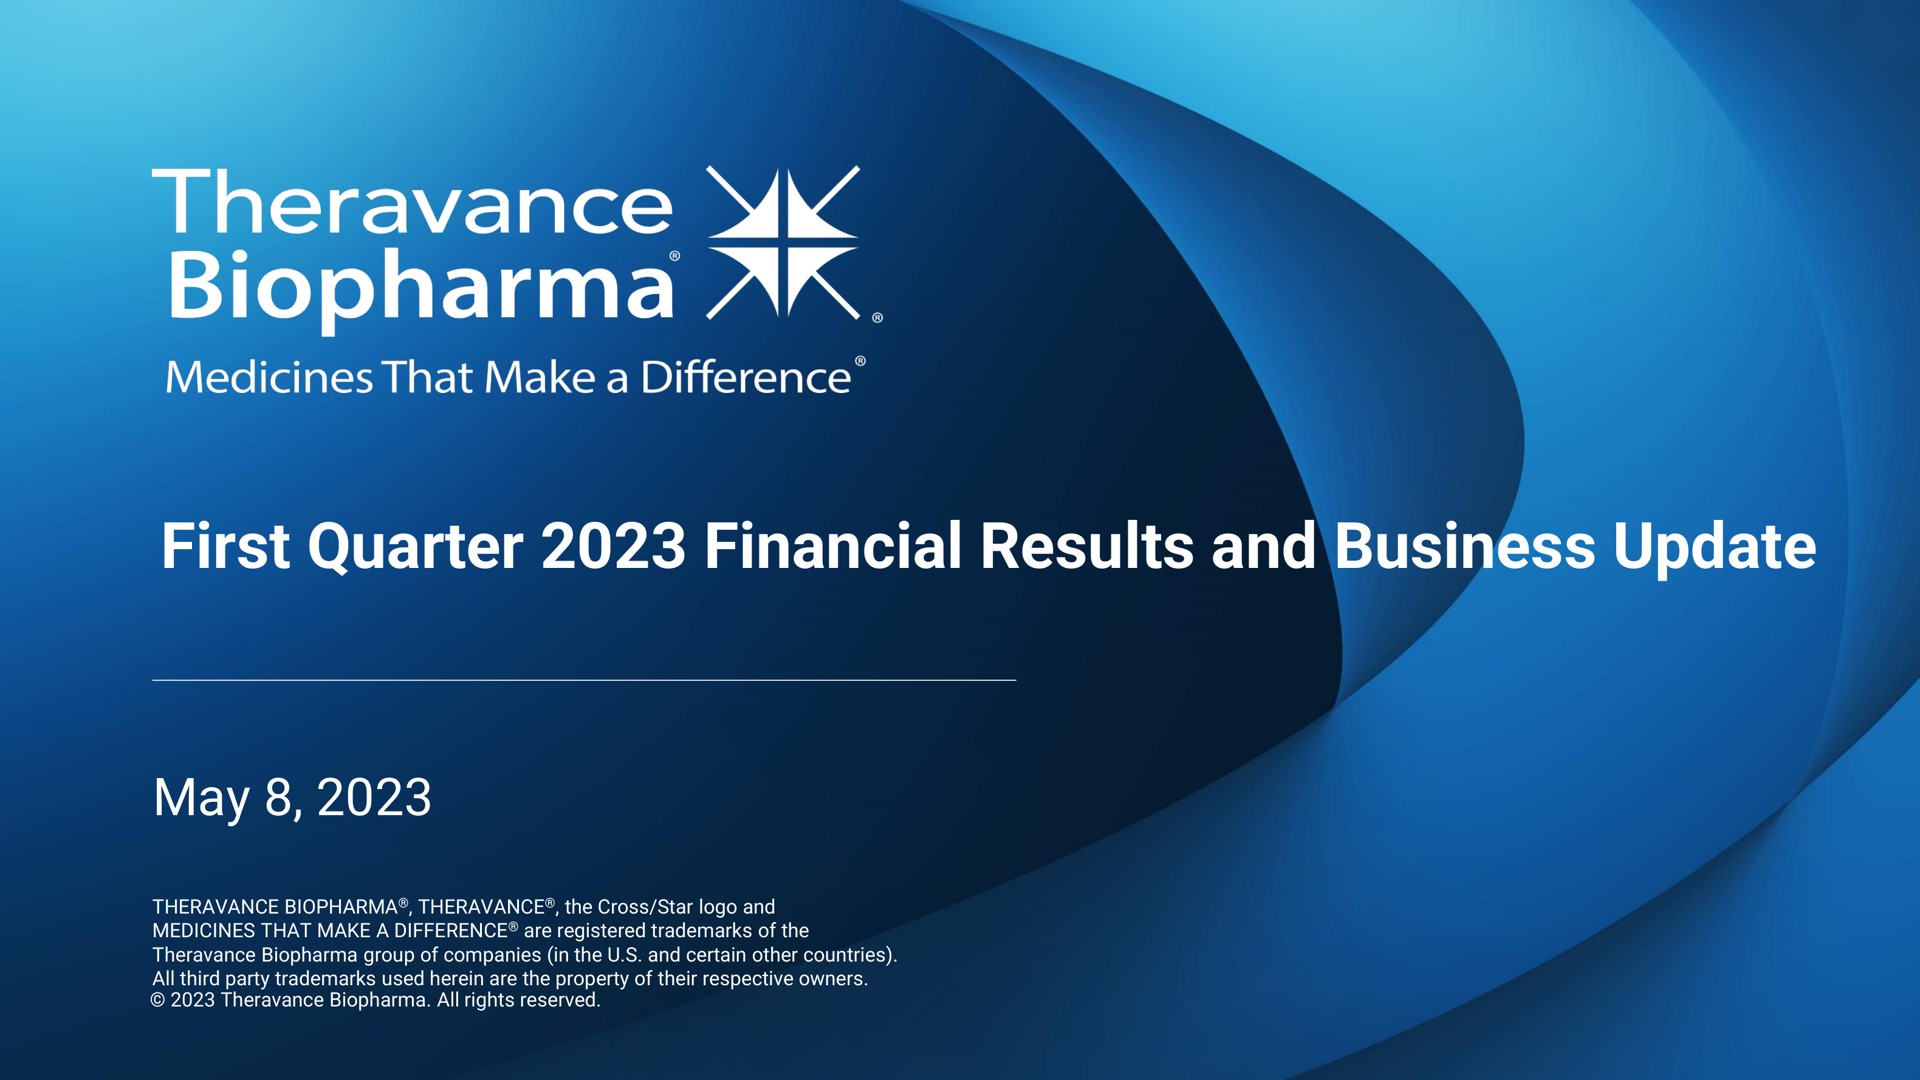 first quarter financial results and business update may | Theravance Biopharma